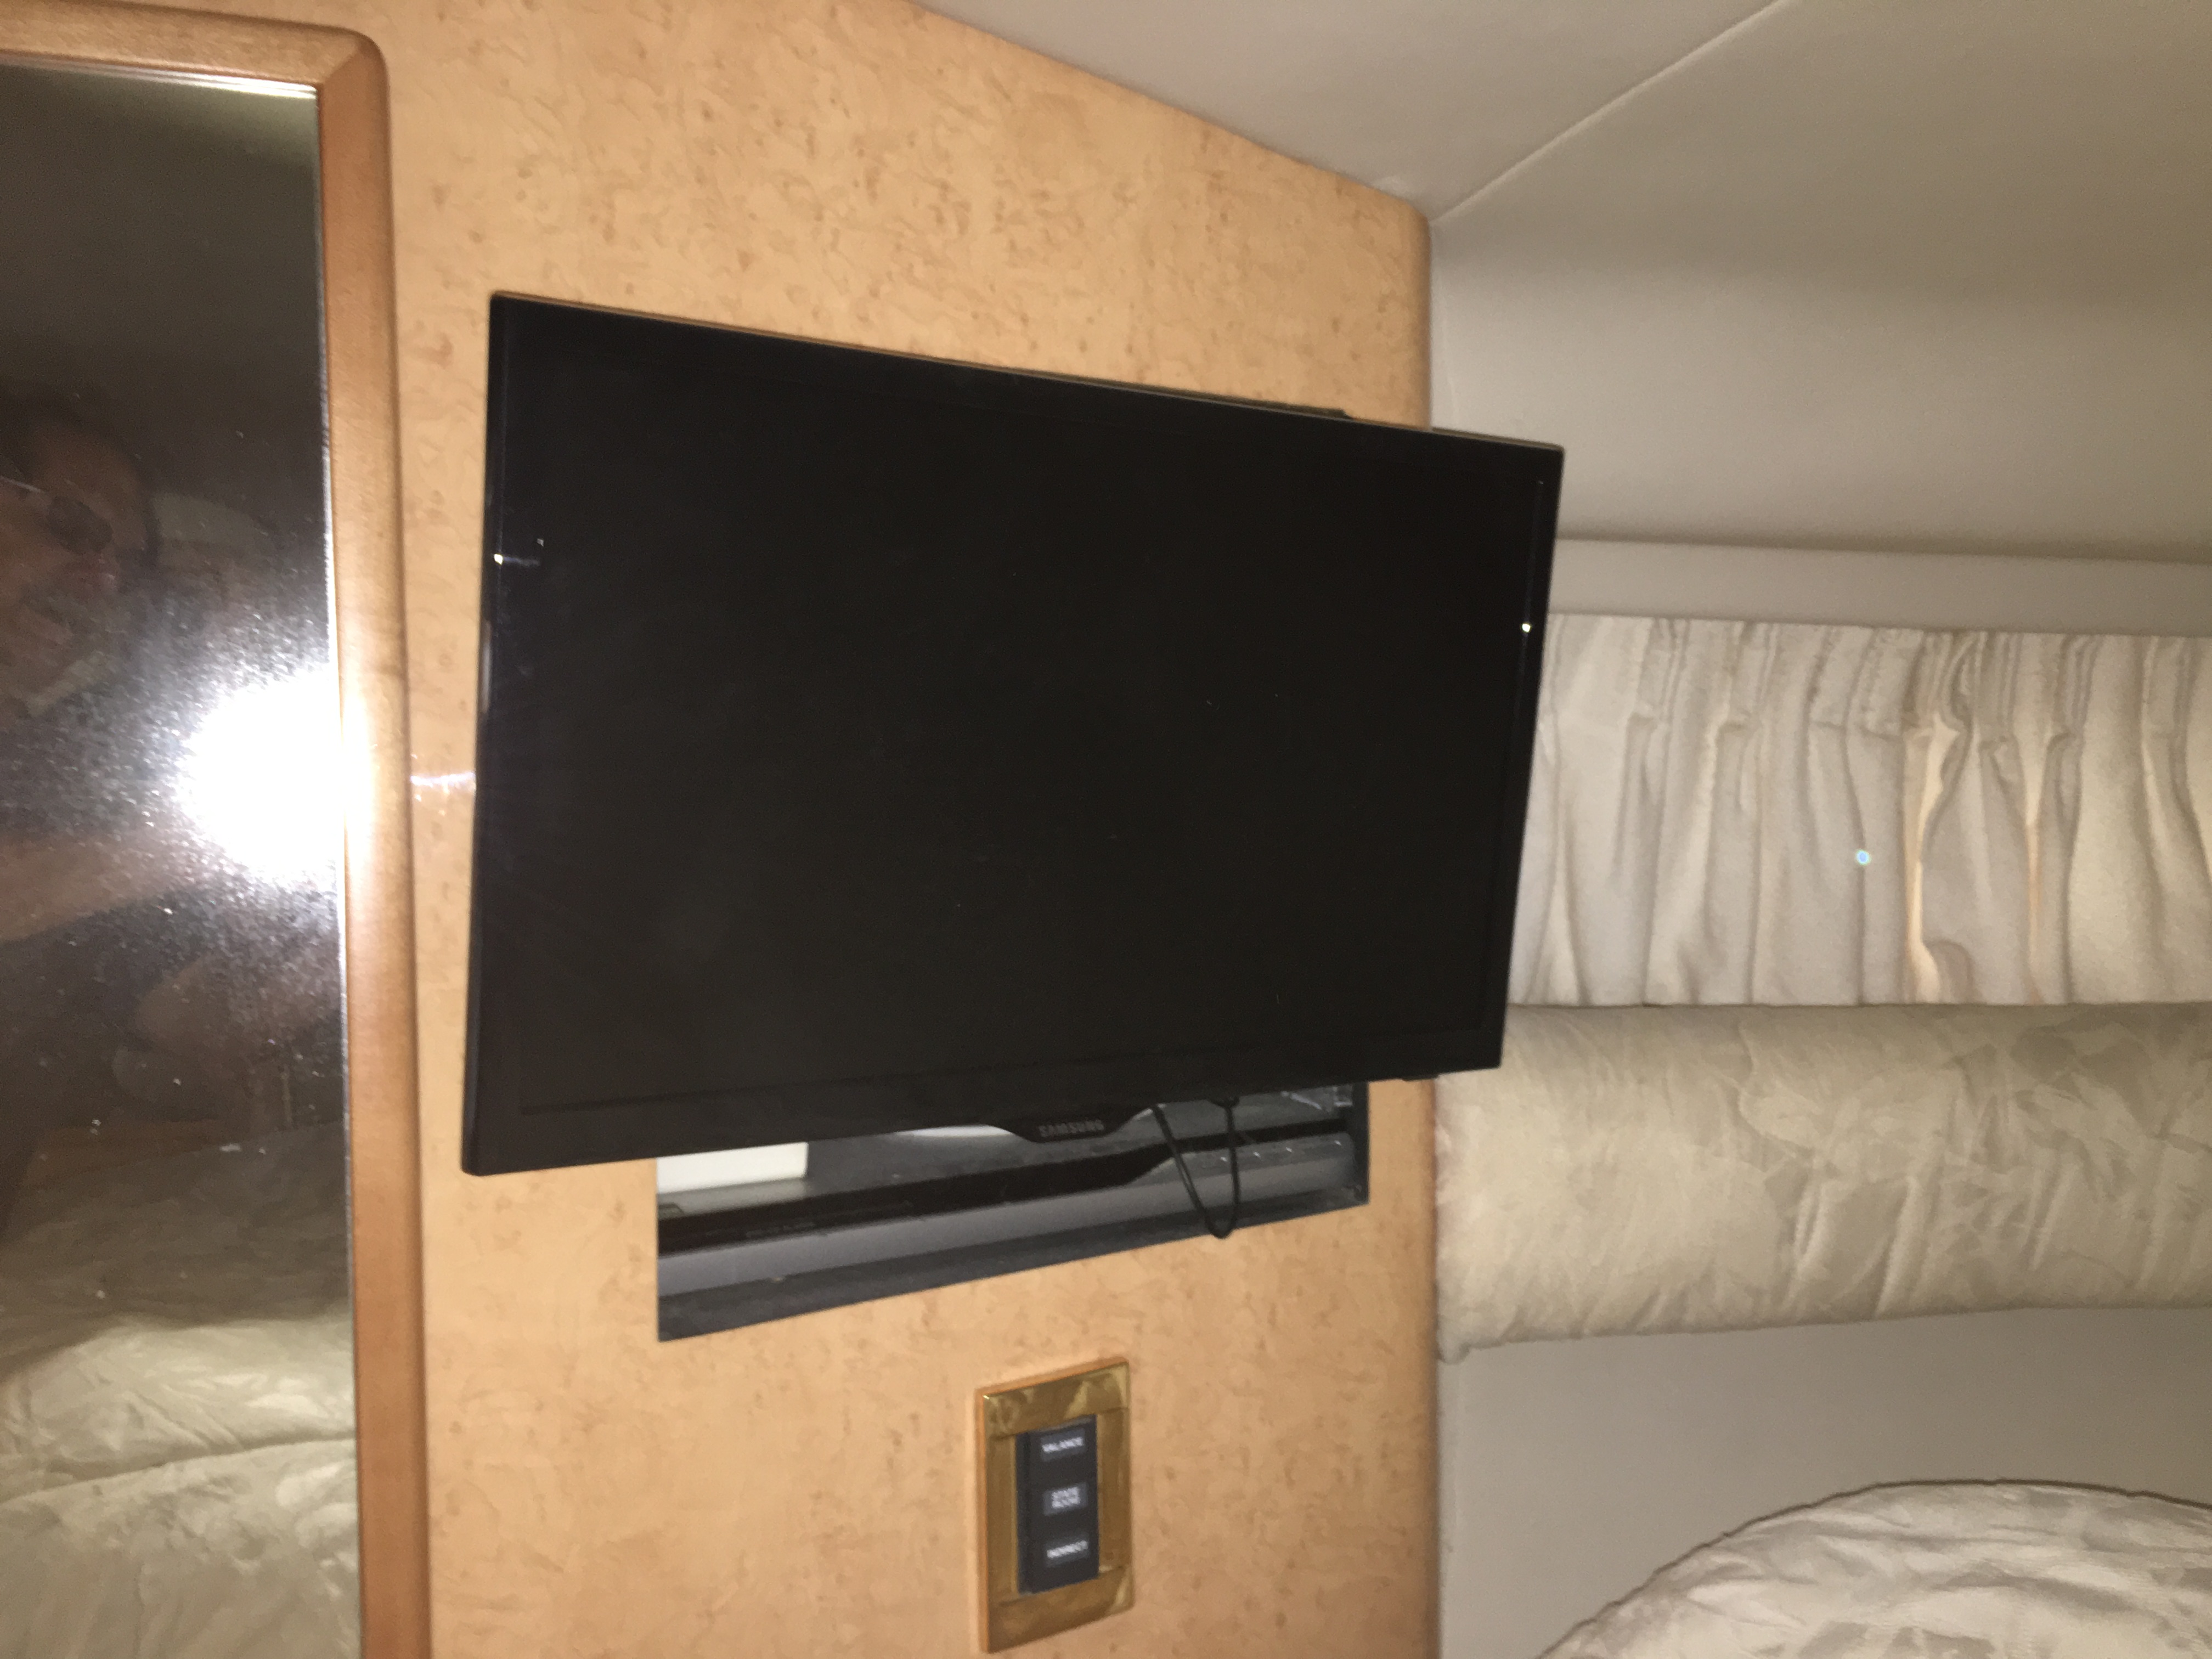 Front Berth 1080P flat panel TV with Blu-ray player